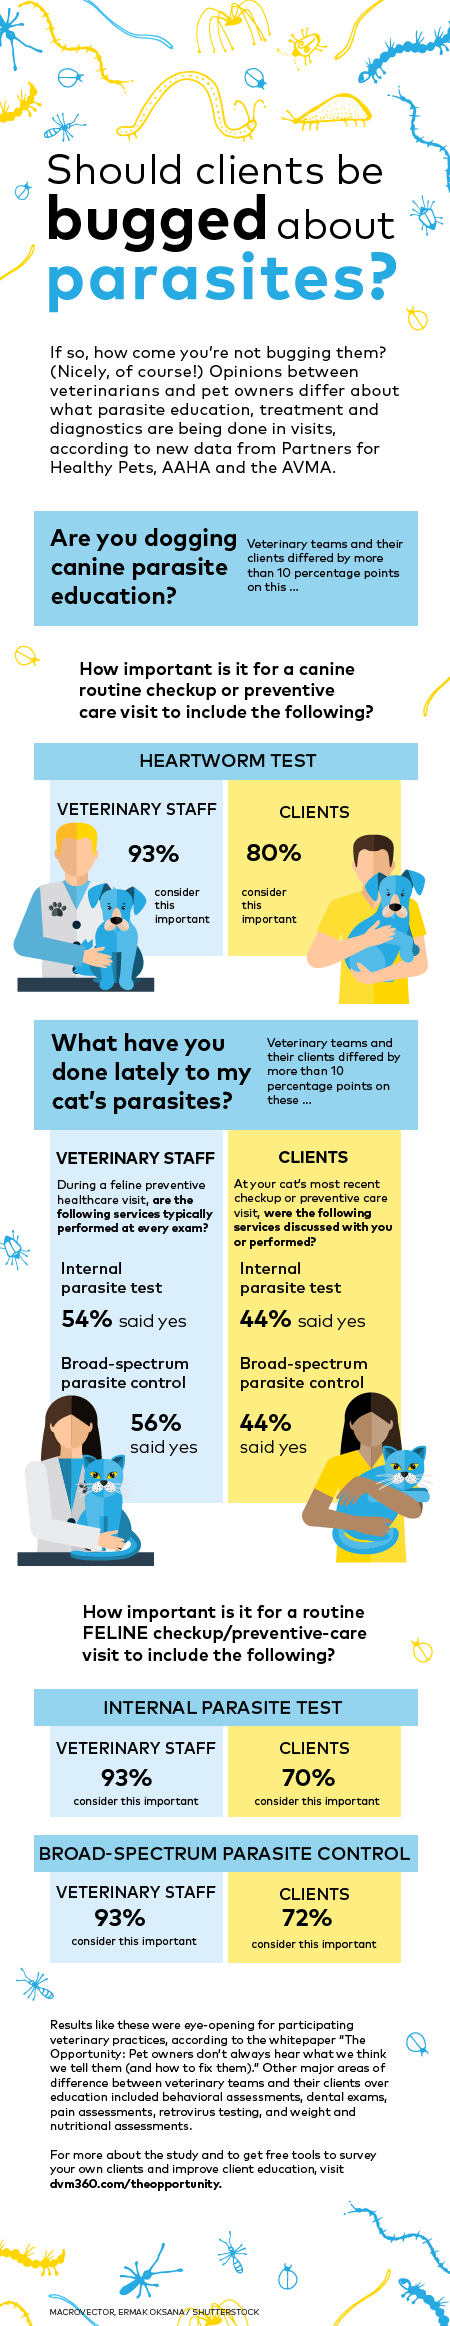 veterinary-parasitology-client.png